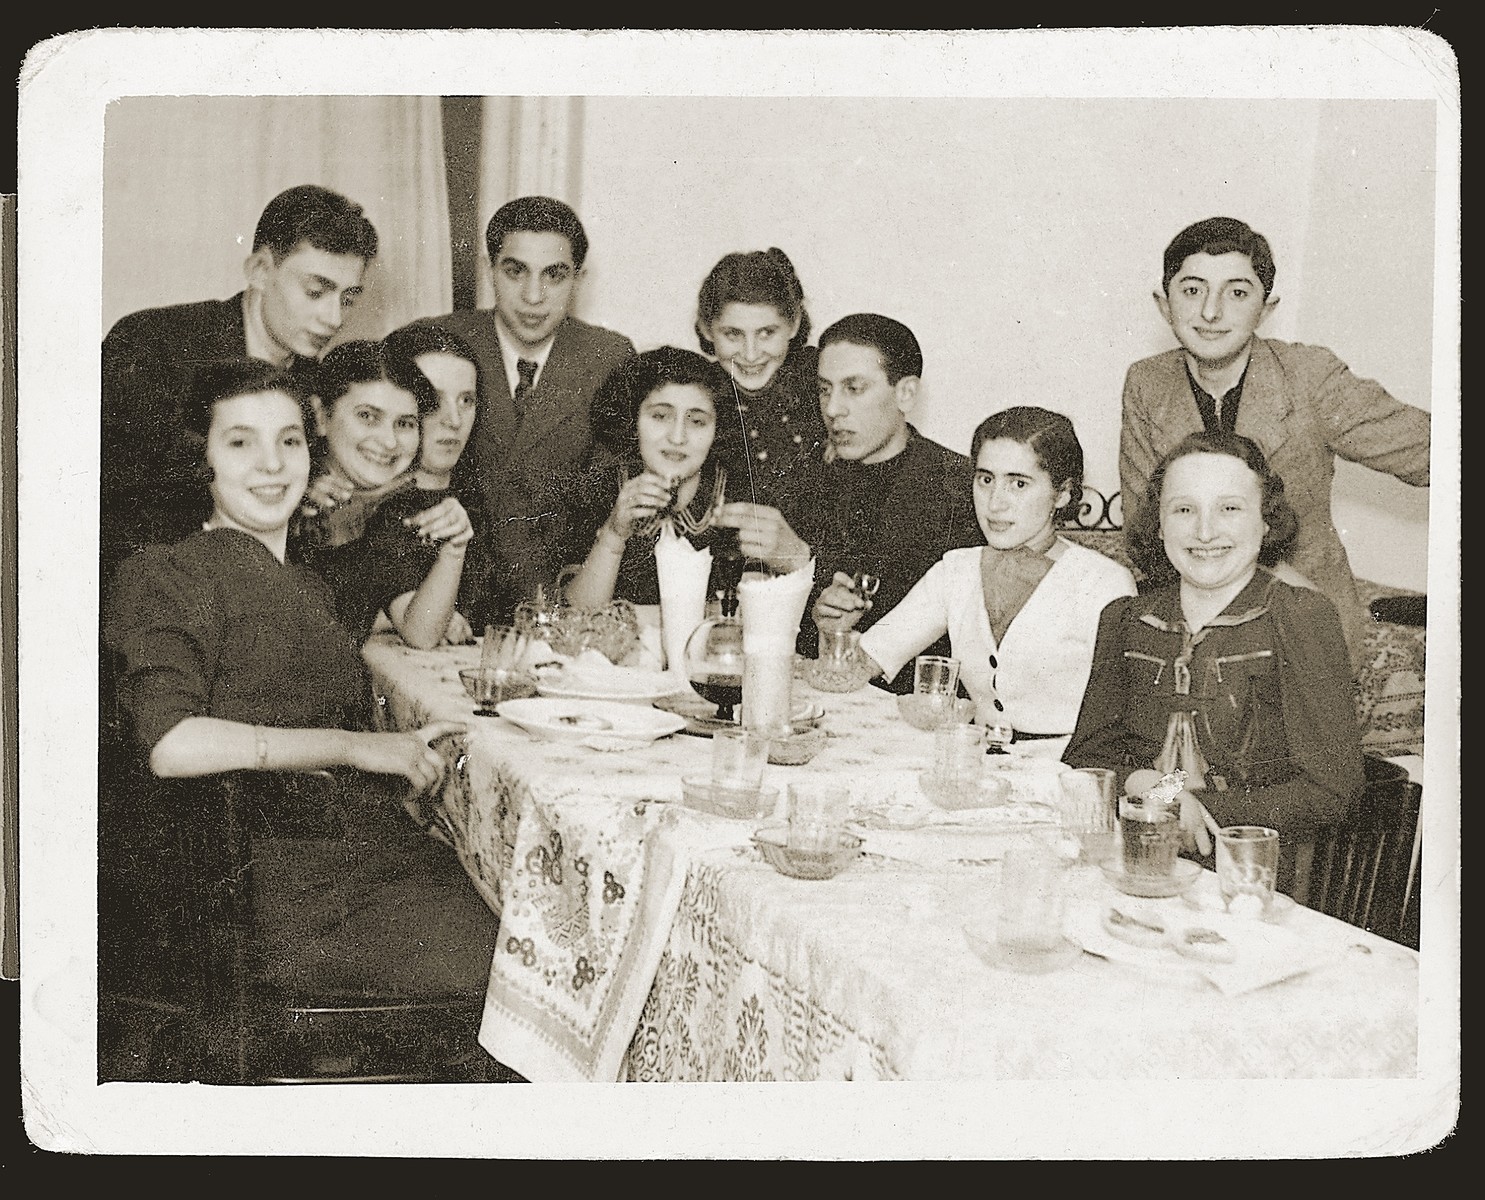 Itka Urman entertains friends in her home in Czeladz.

Standing at the head of the table is  Gary Kliman.